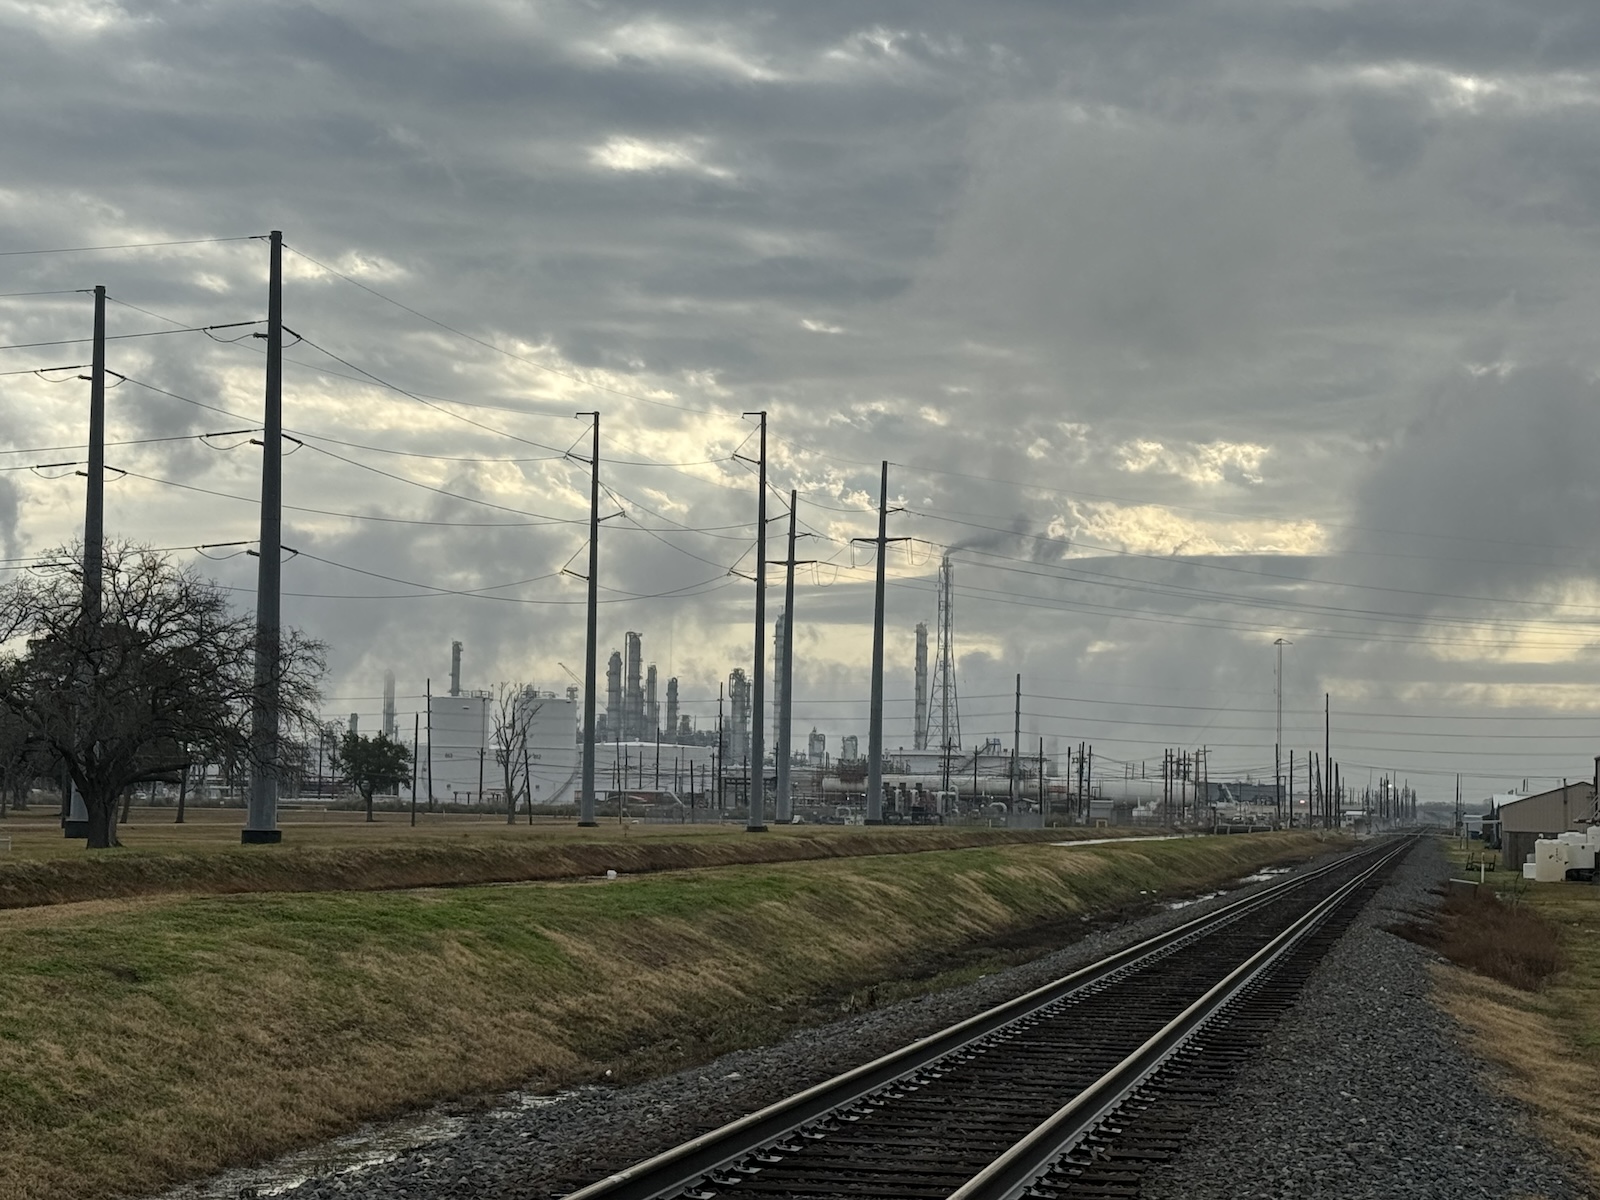 Railroad tracks with petrochemical plant in background